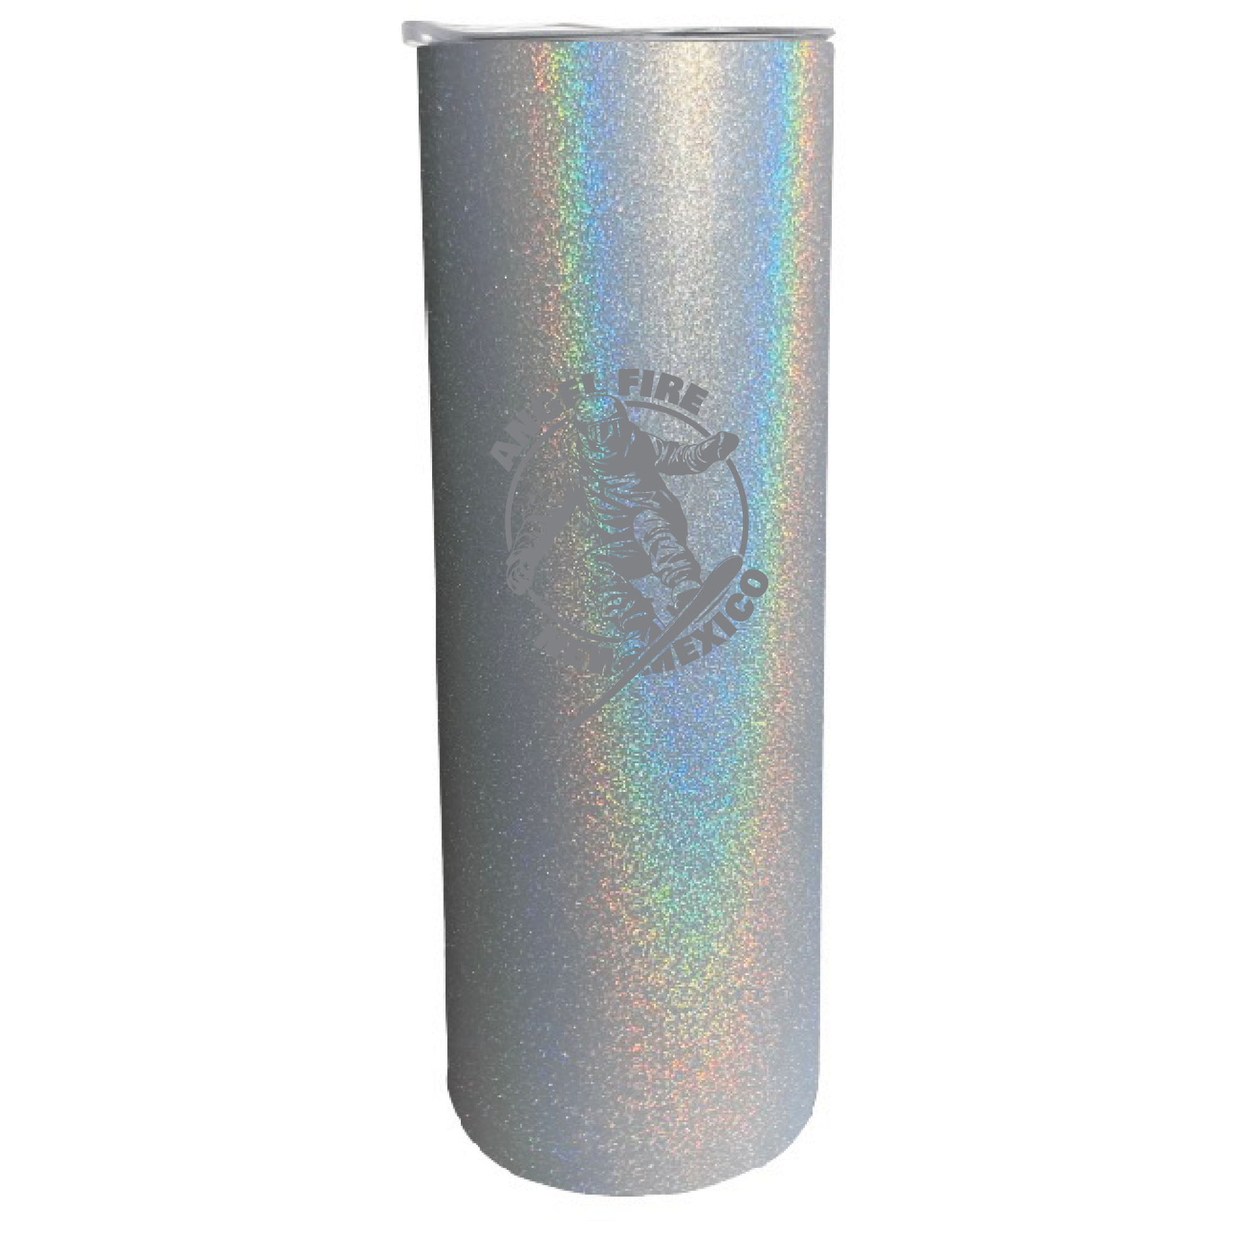 Angel Fire New Mexico Souvenir 20 Oz Engraved Insulated Stainless Steel Skinny Tumbler - Gray Glitter,,2-Pack